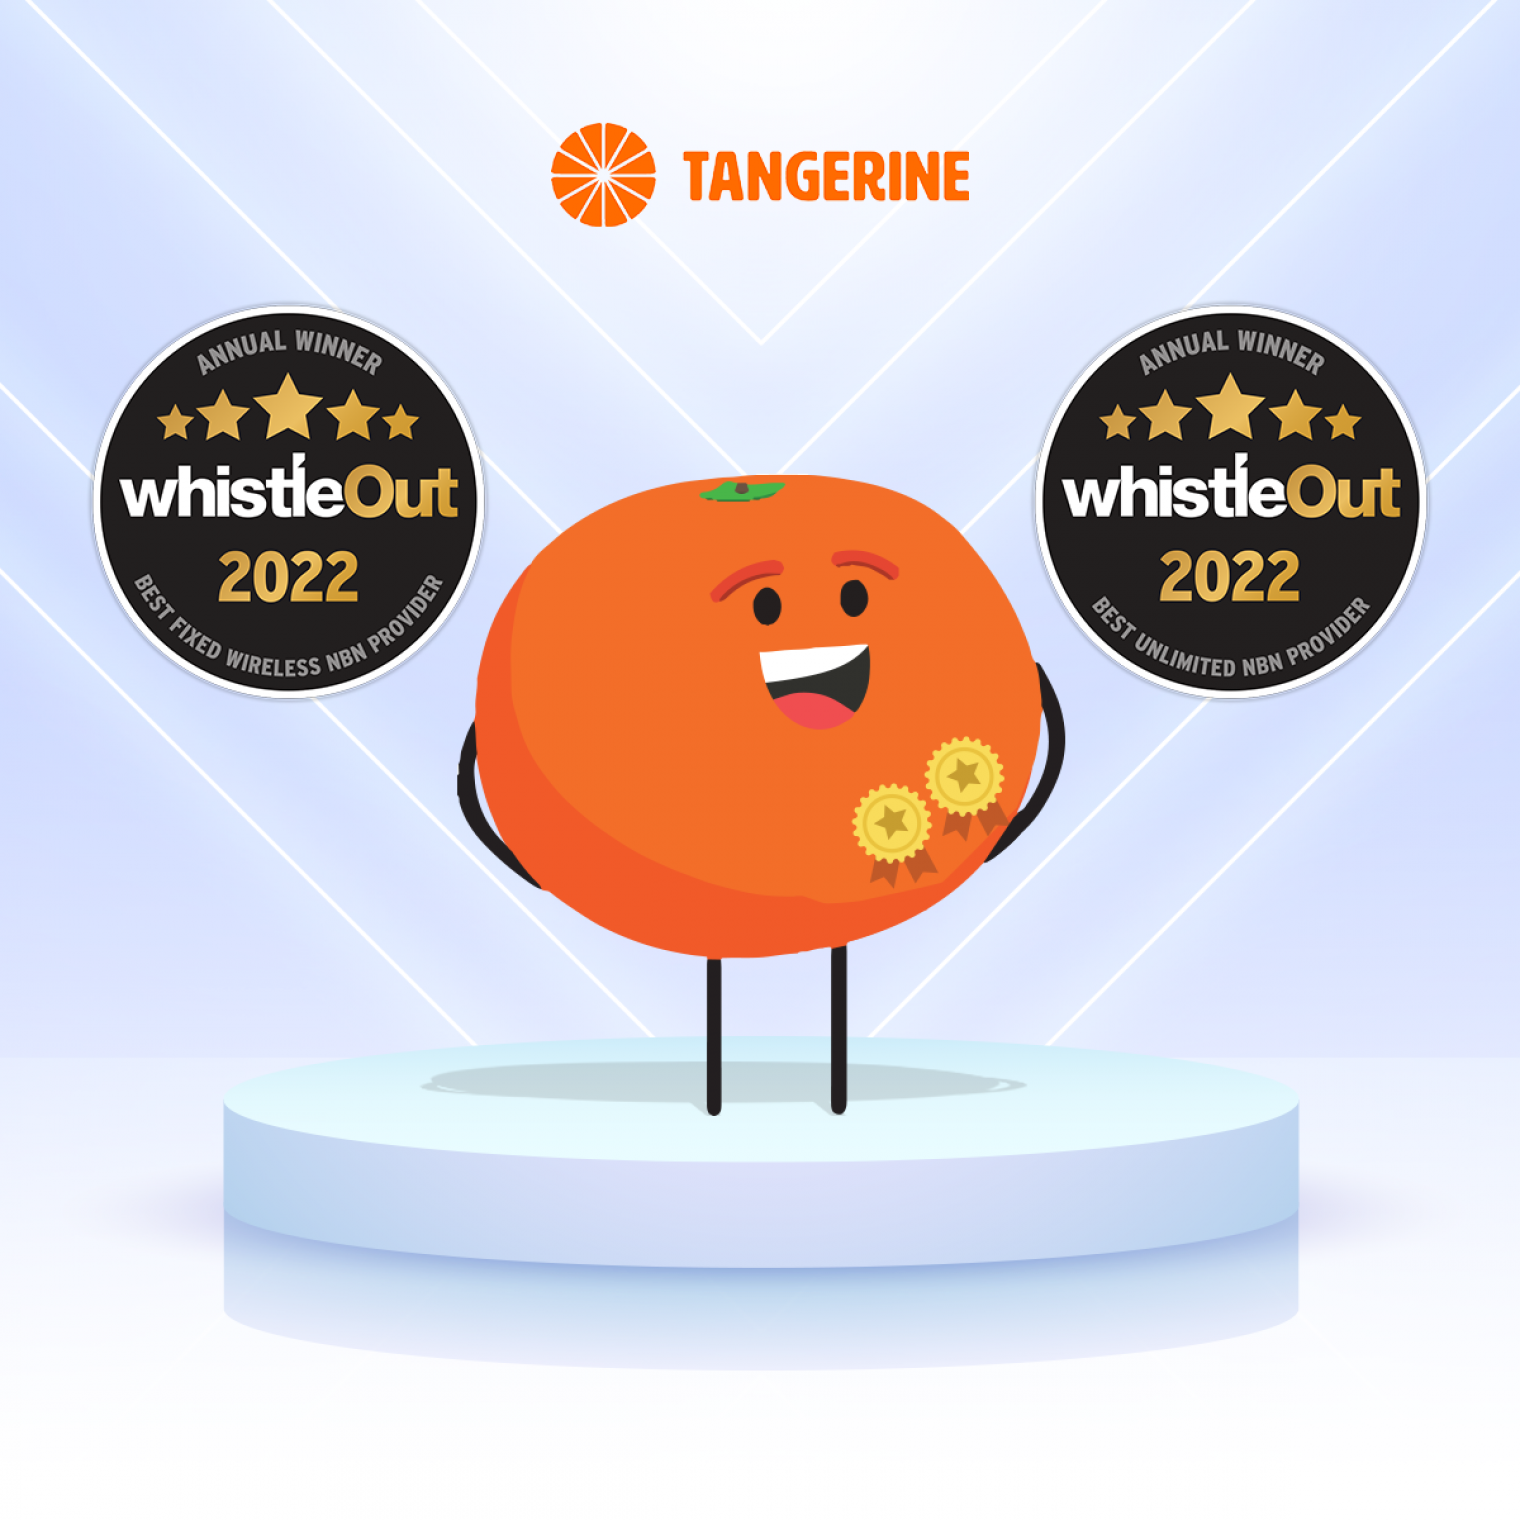 Tangerine has won WhistleOut’s Best Unlimited nbn<sup>®</sup> Provider, and the Best Fixed Wireless nbn<sup>®</sup> Provider awards for 2022!